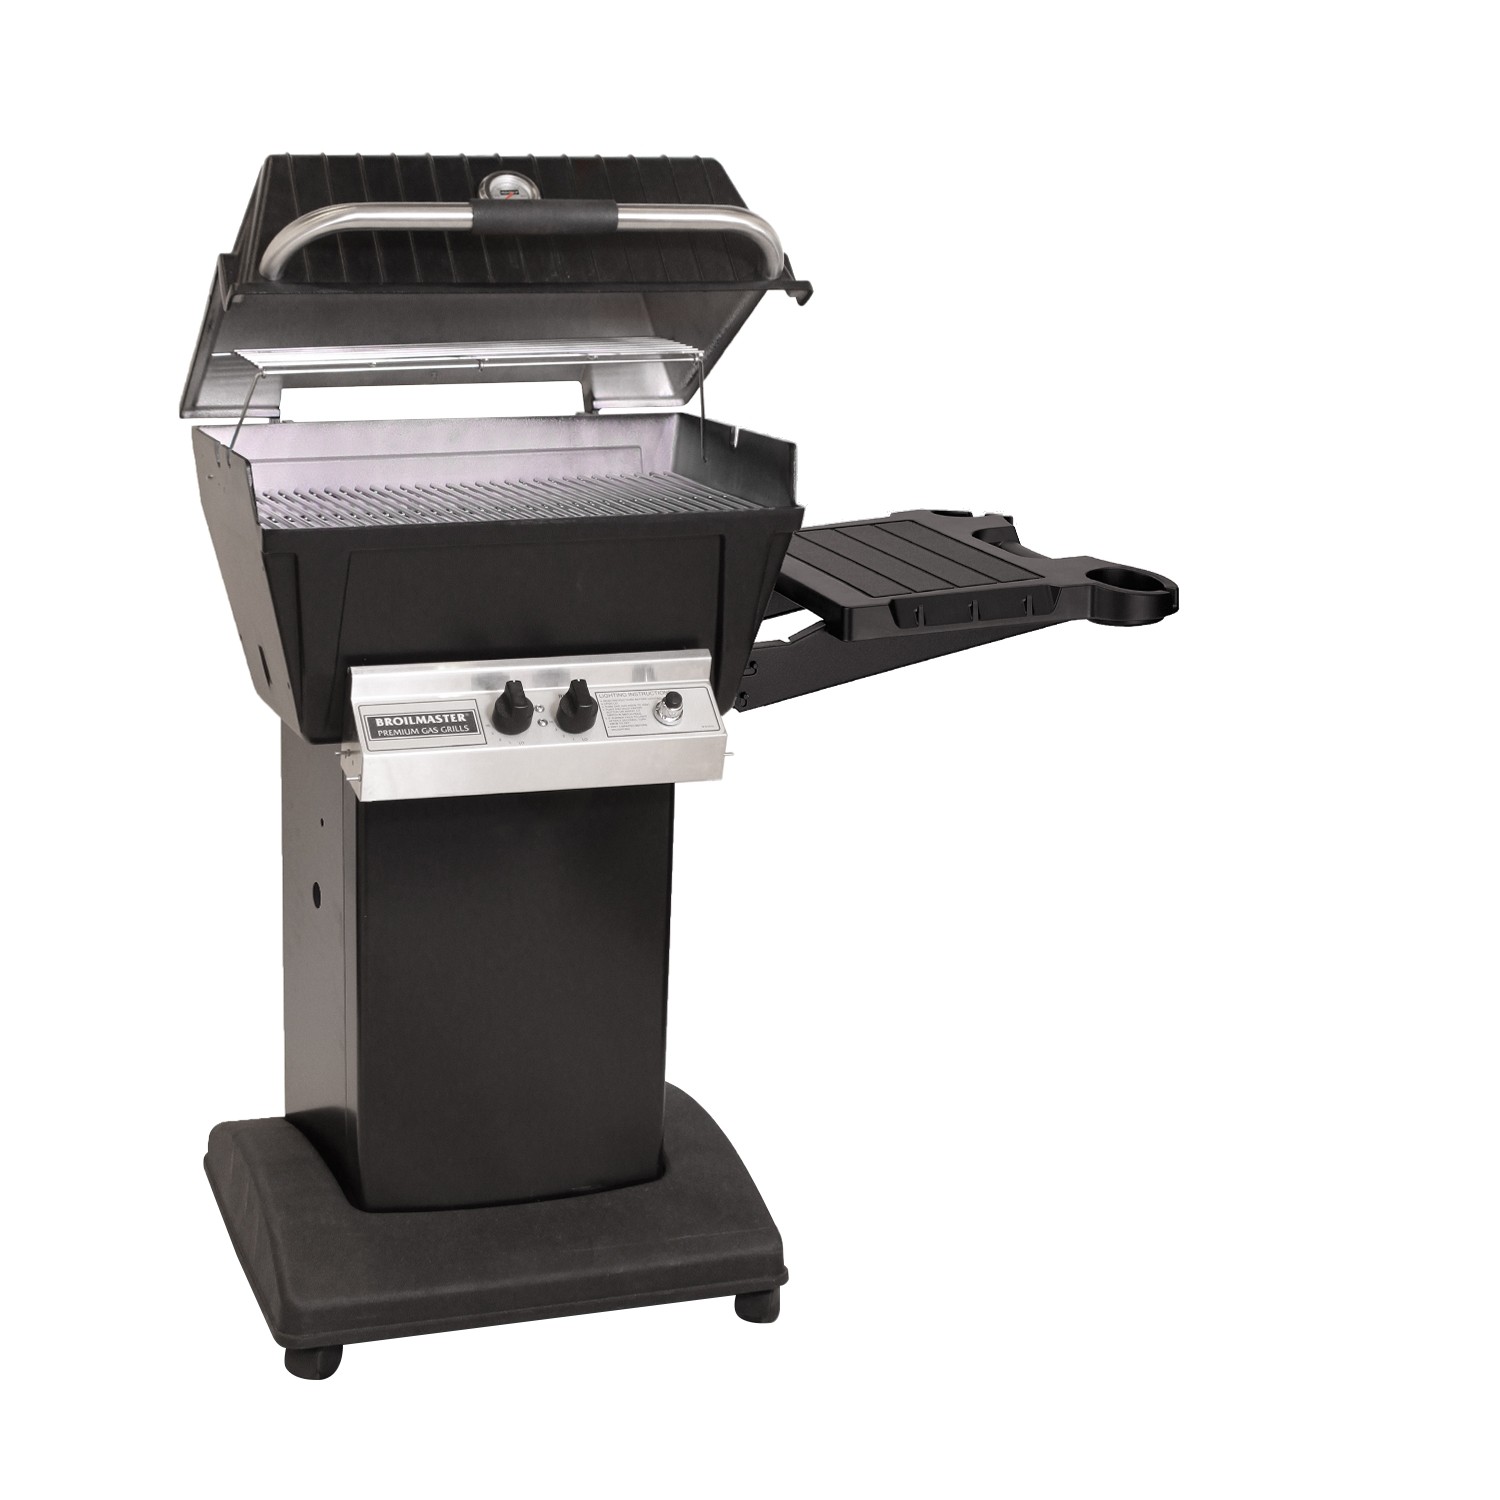 BROILMASTER H4XN DELUXE SERIES NATURAL GAS GRILL - BLACK